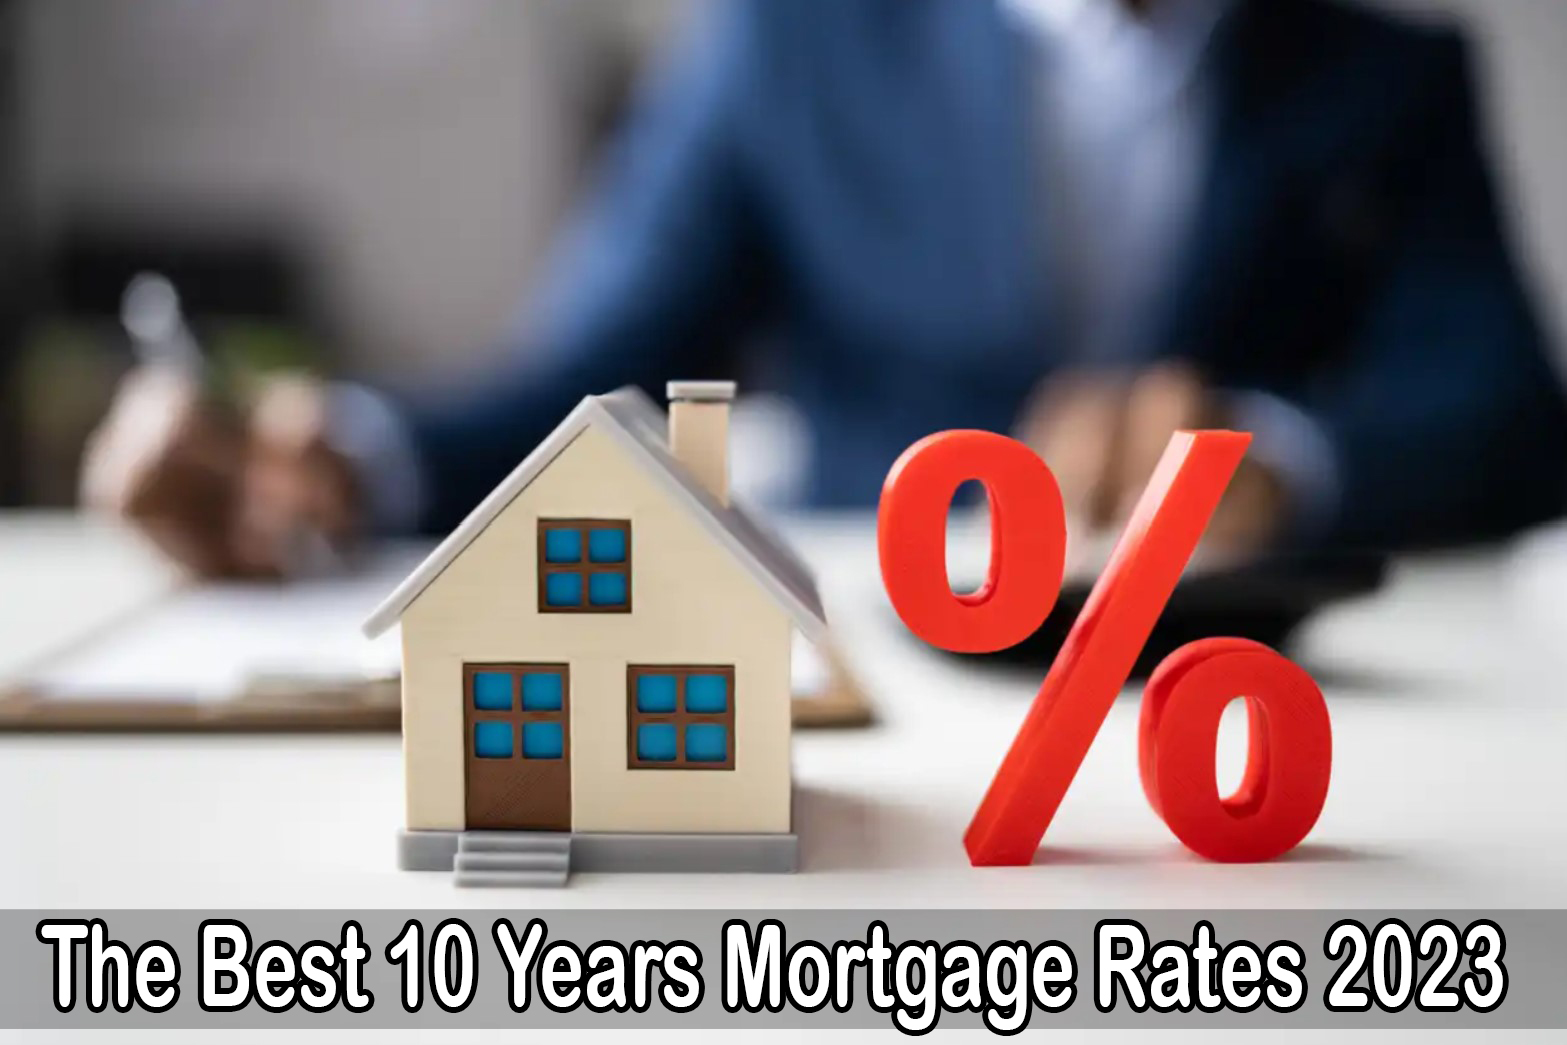 The Best 10 Years Mortgage Rates 2023